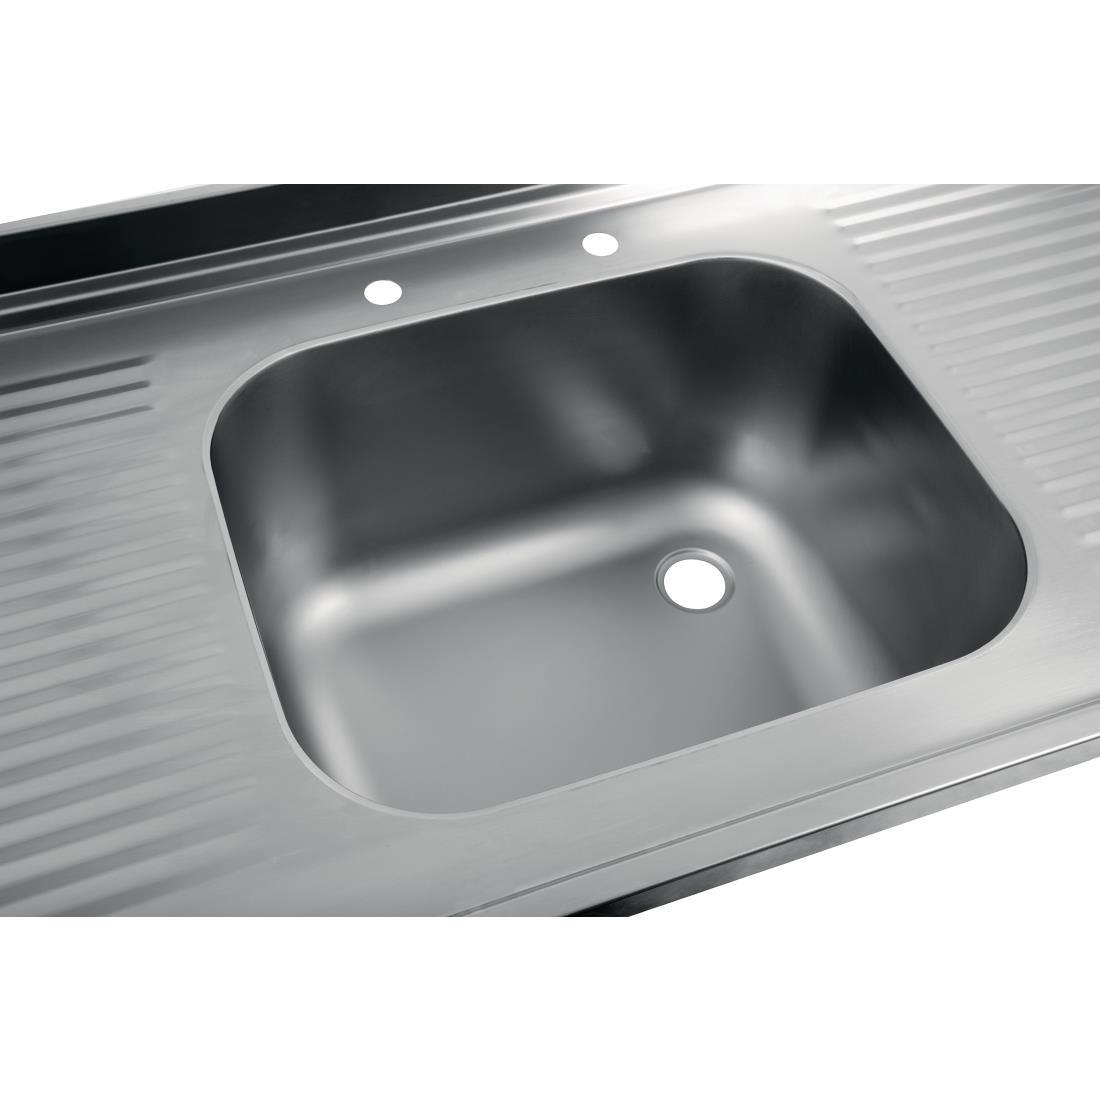 Holmes Stainless Steel Sink Double Drainer 1800mm - DR397  - 4